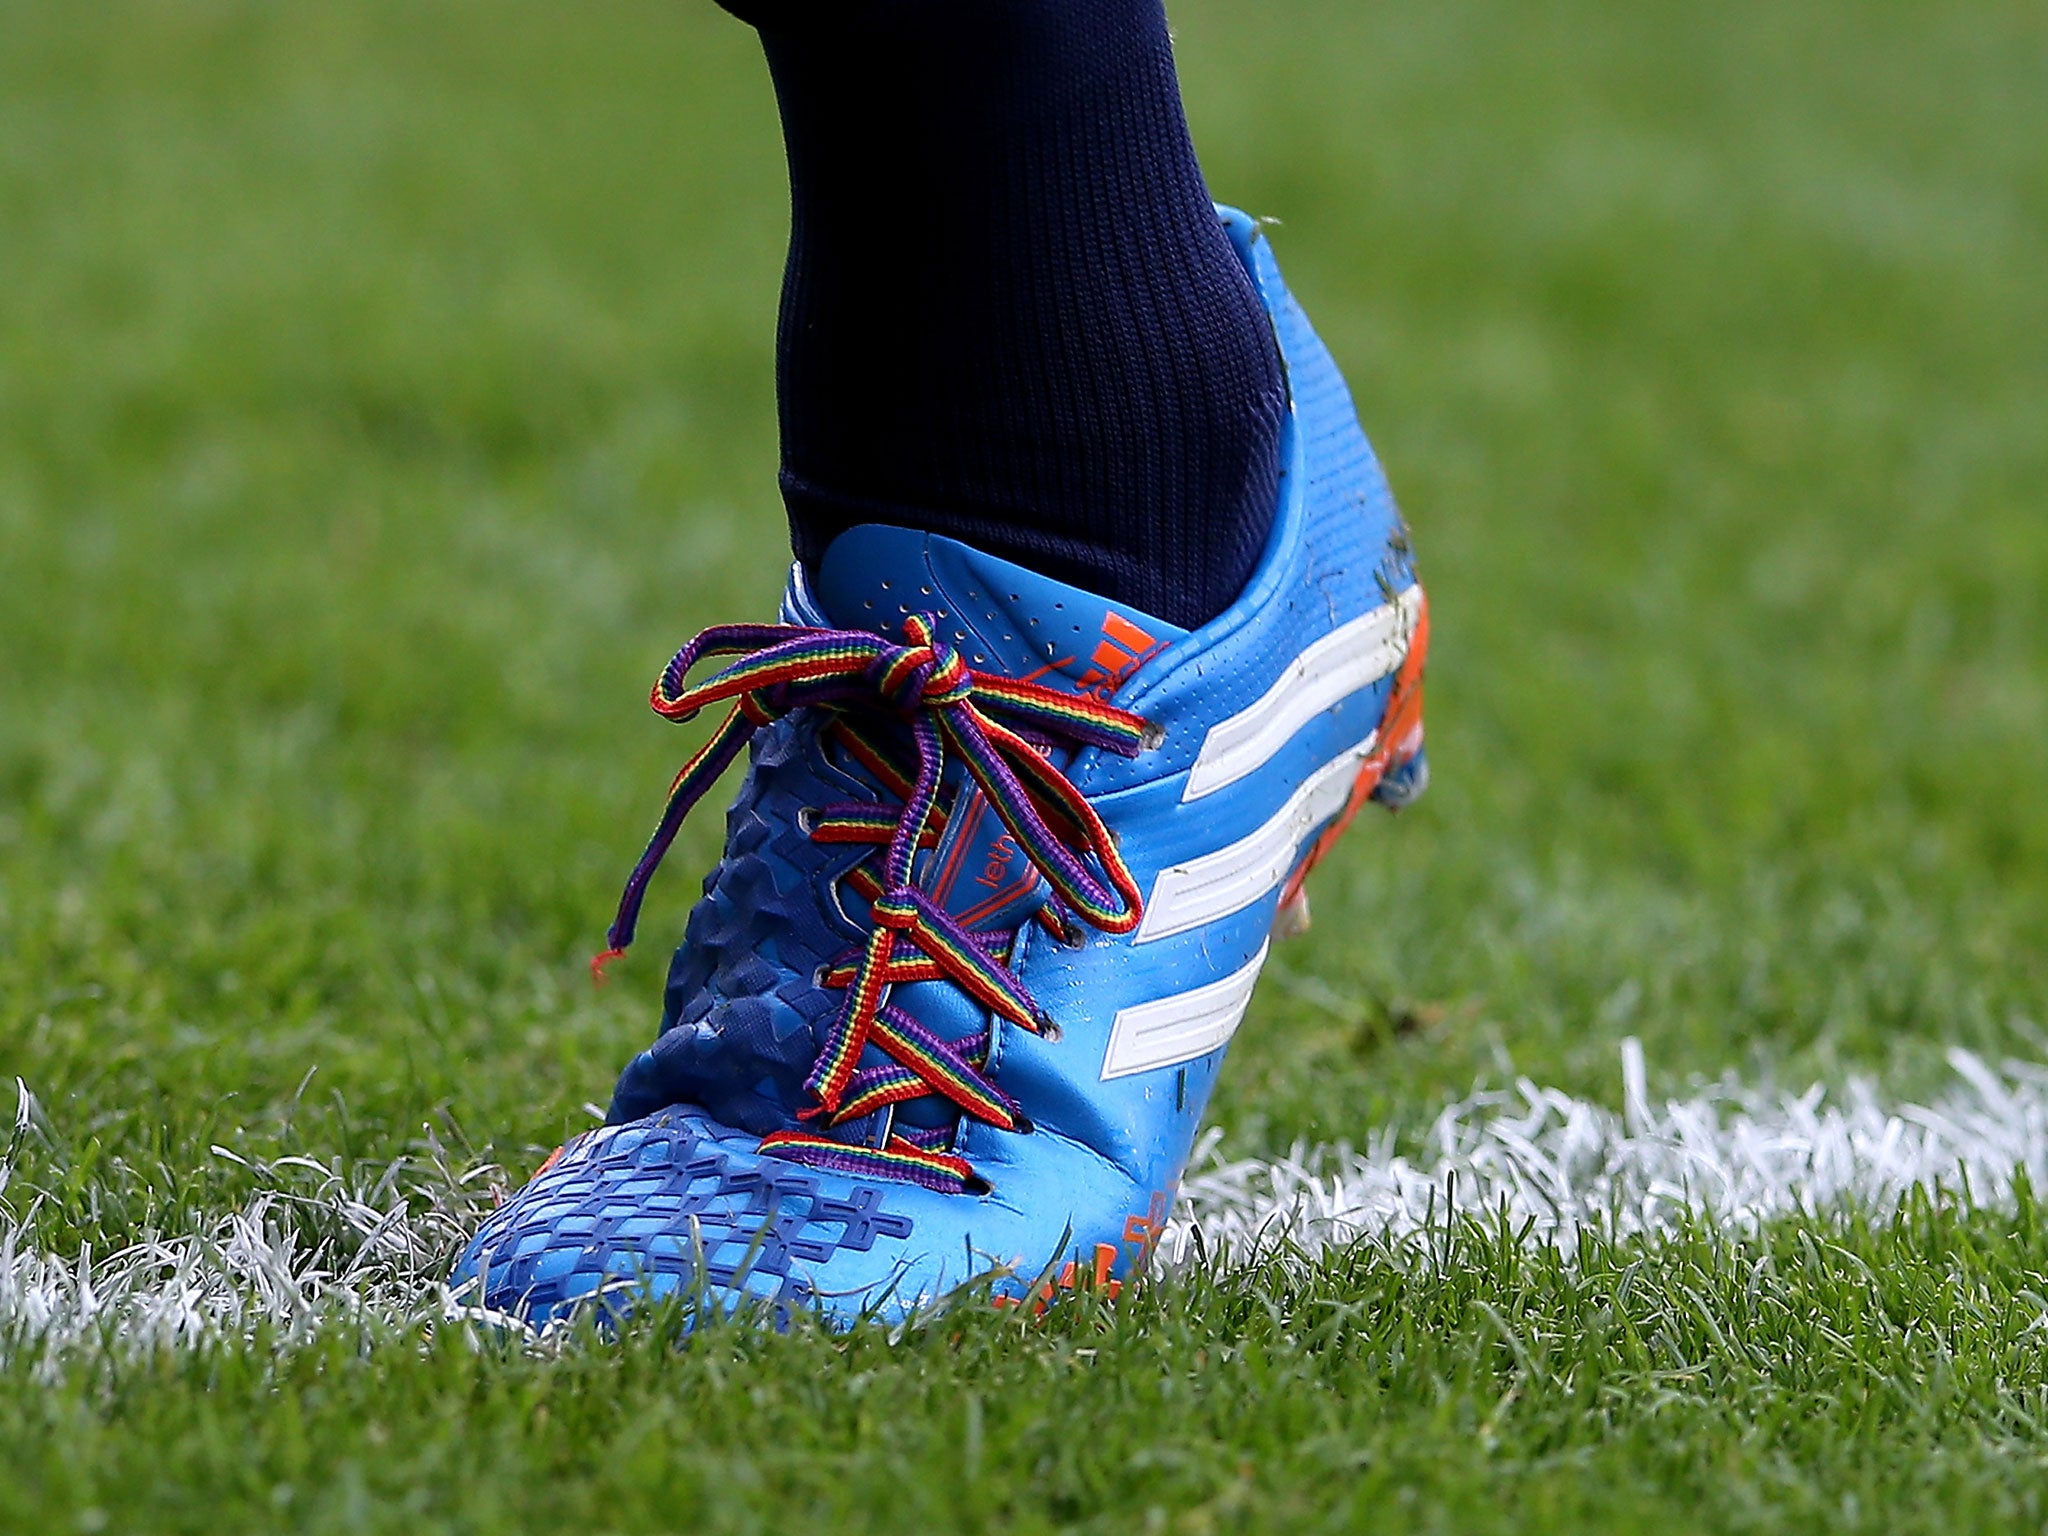 United participated in the charity's Rainbow Laces campaign last year